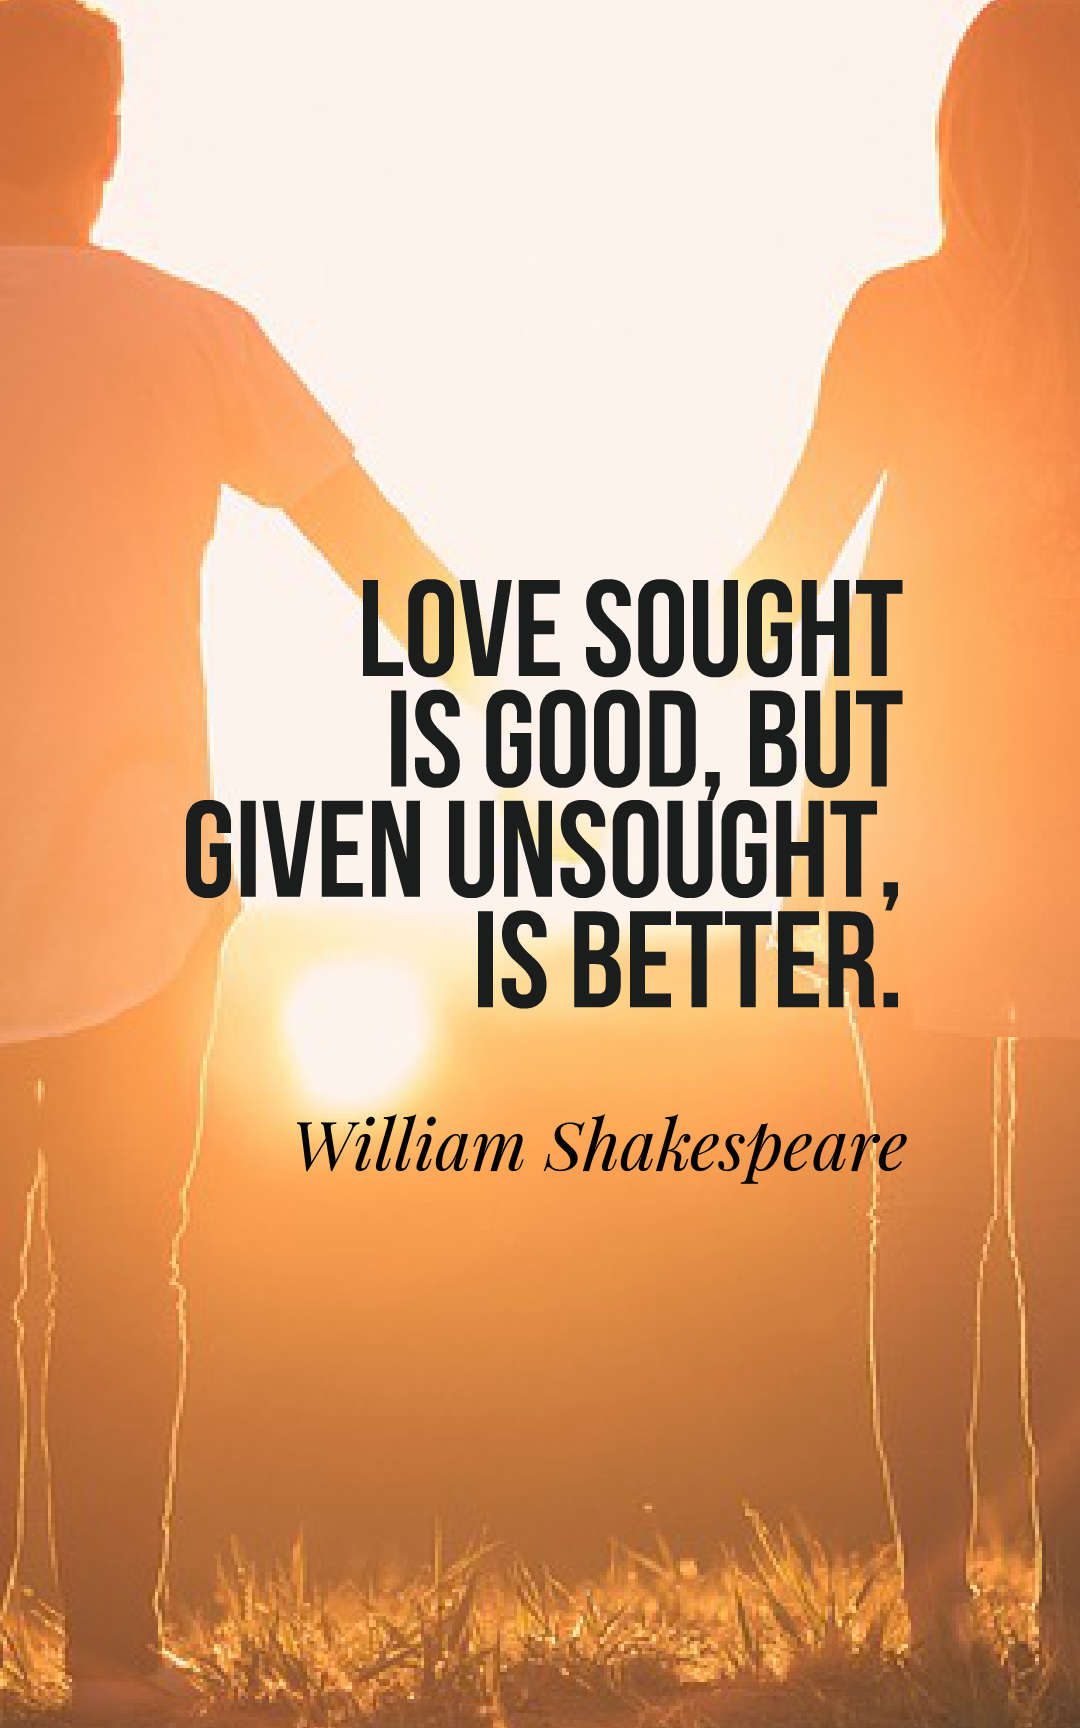 Love sought is good, but given unsought, is better.